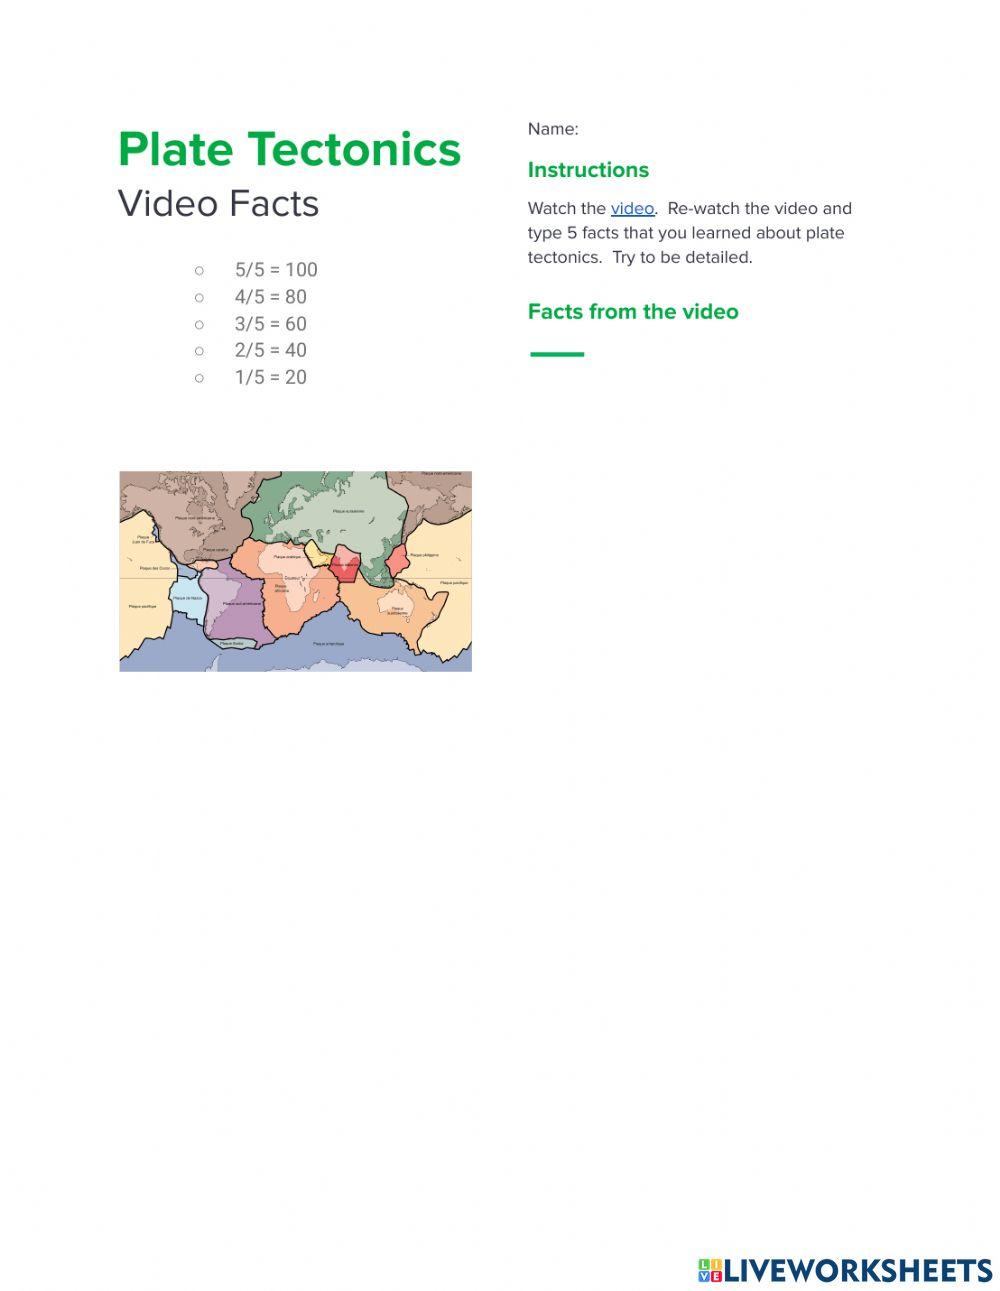 Plate Tectonics Video Facts